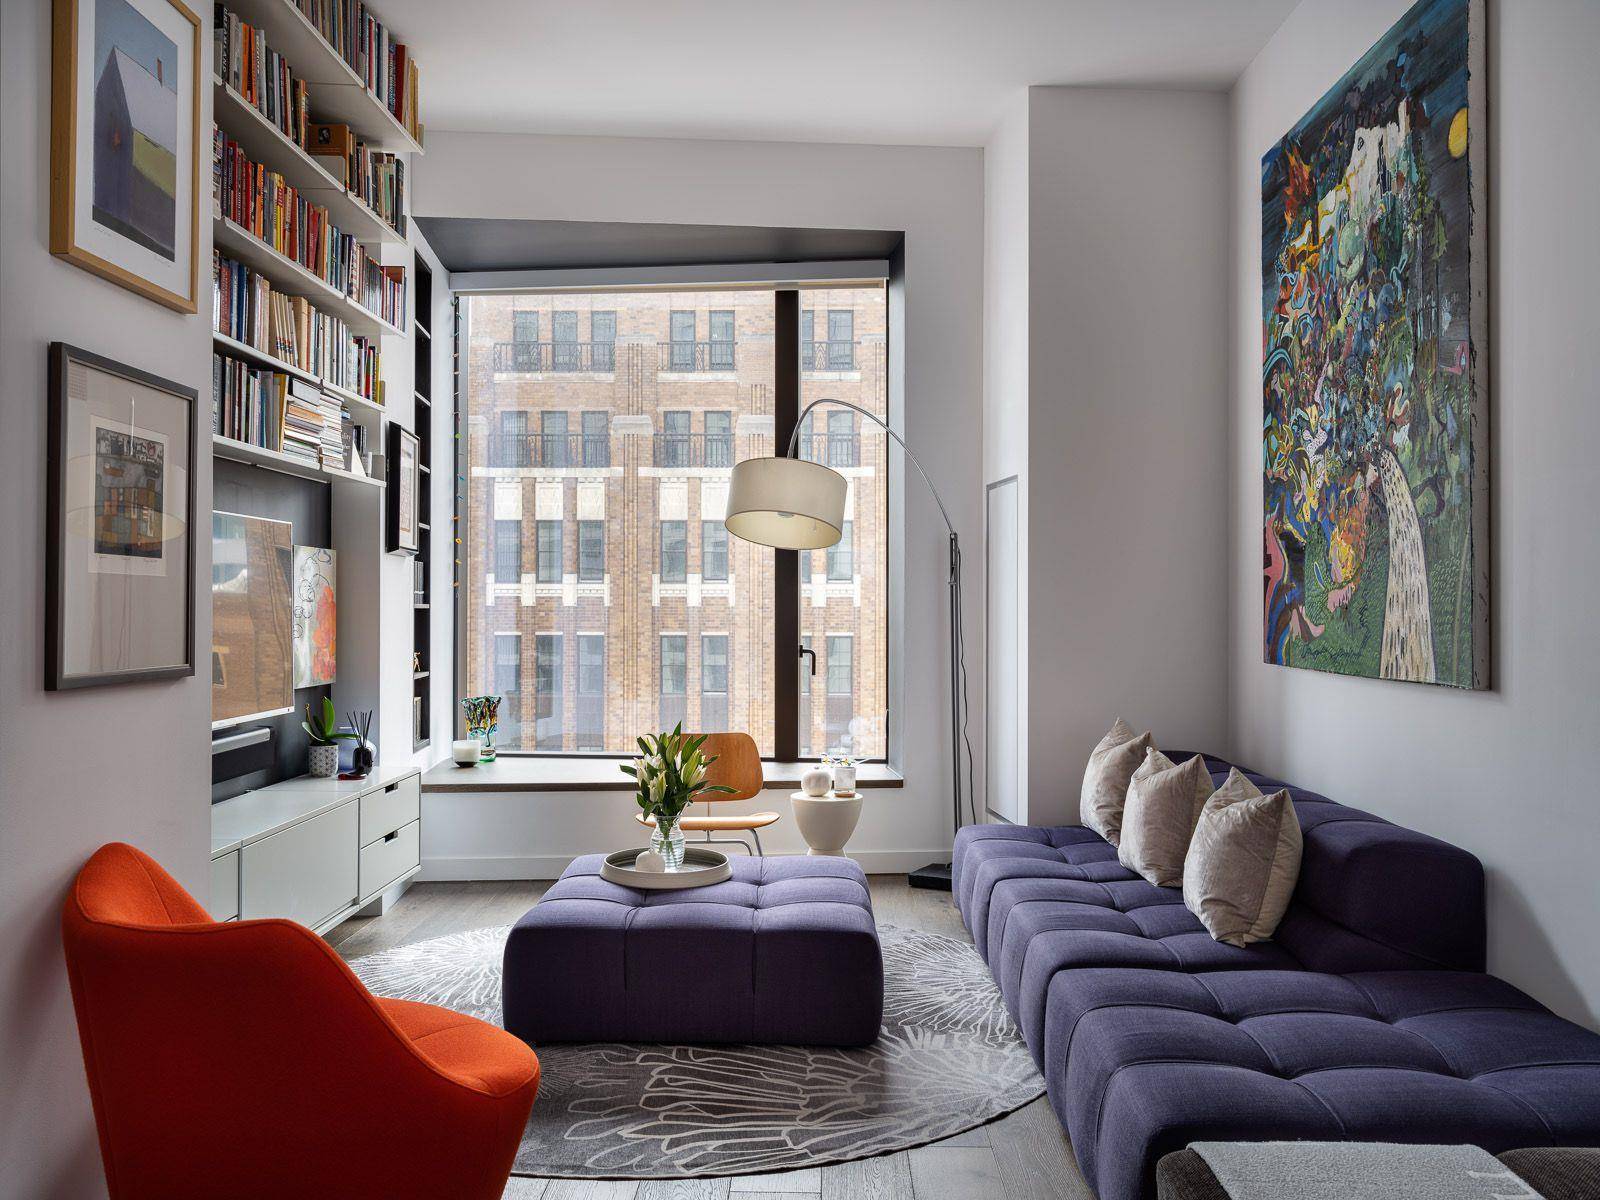 Residence 15B features deep rich tones that are reminiscent of Brooklyn's industrial warehouses.